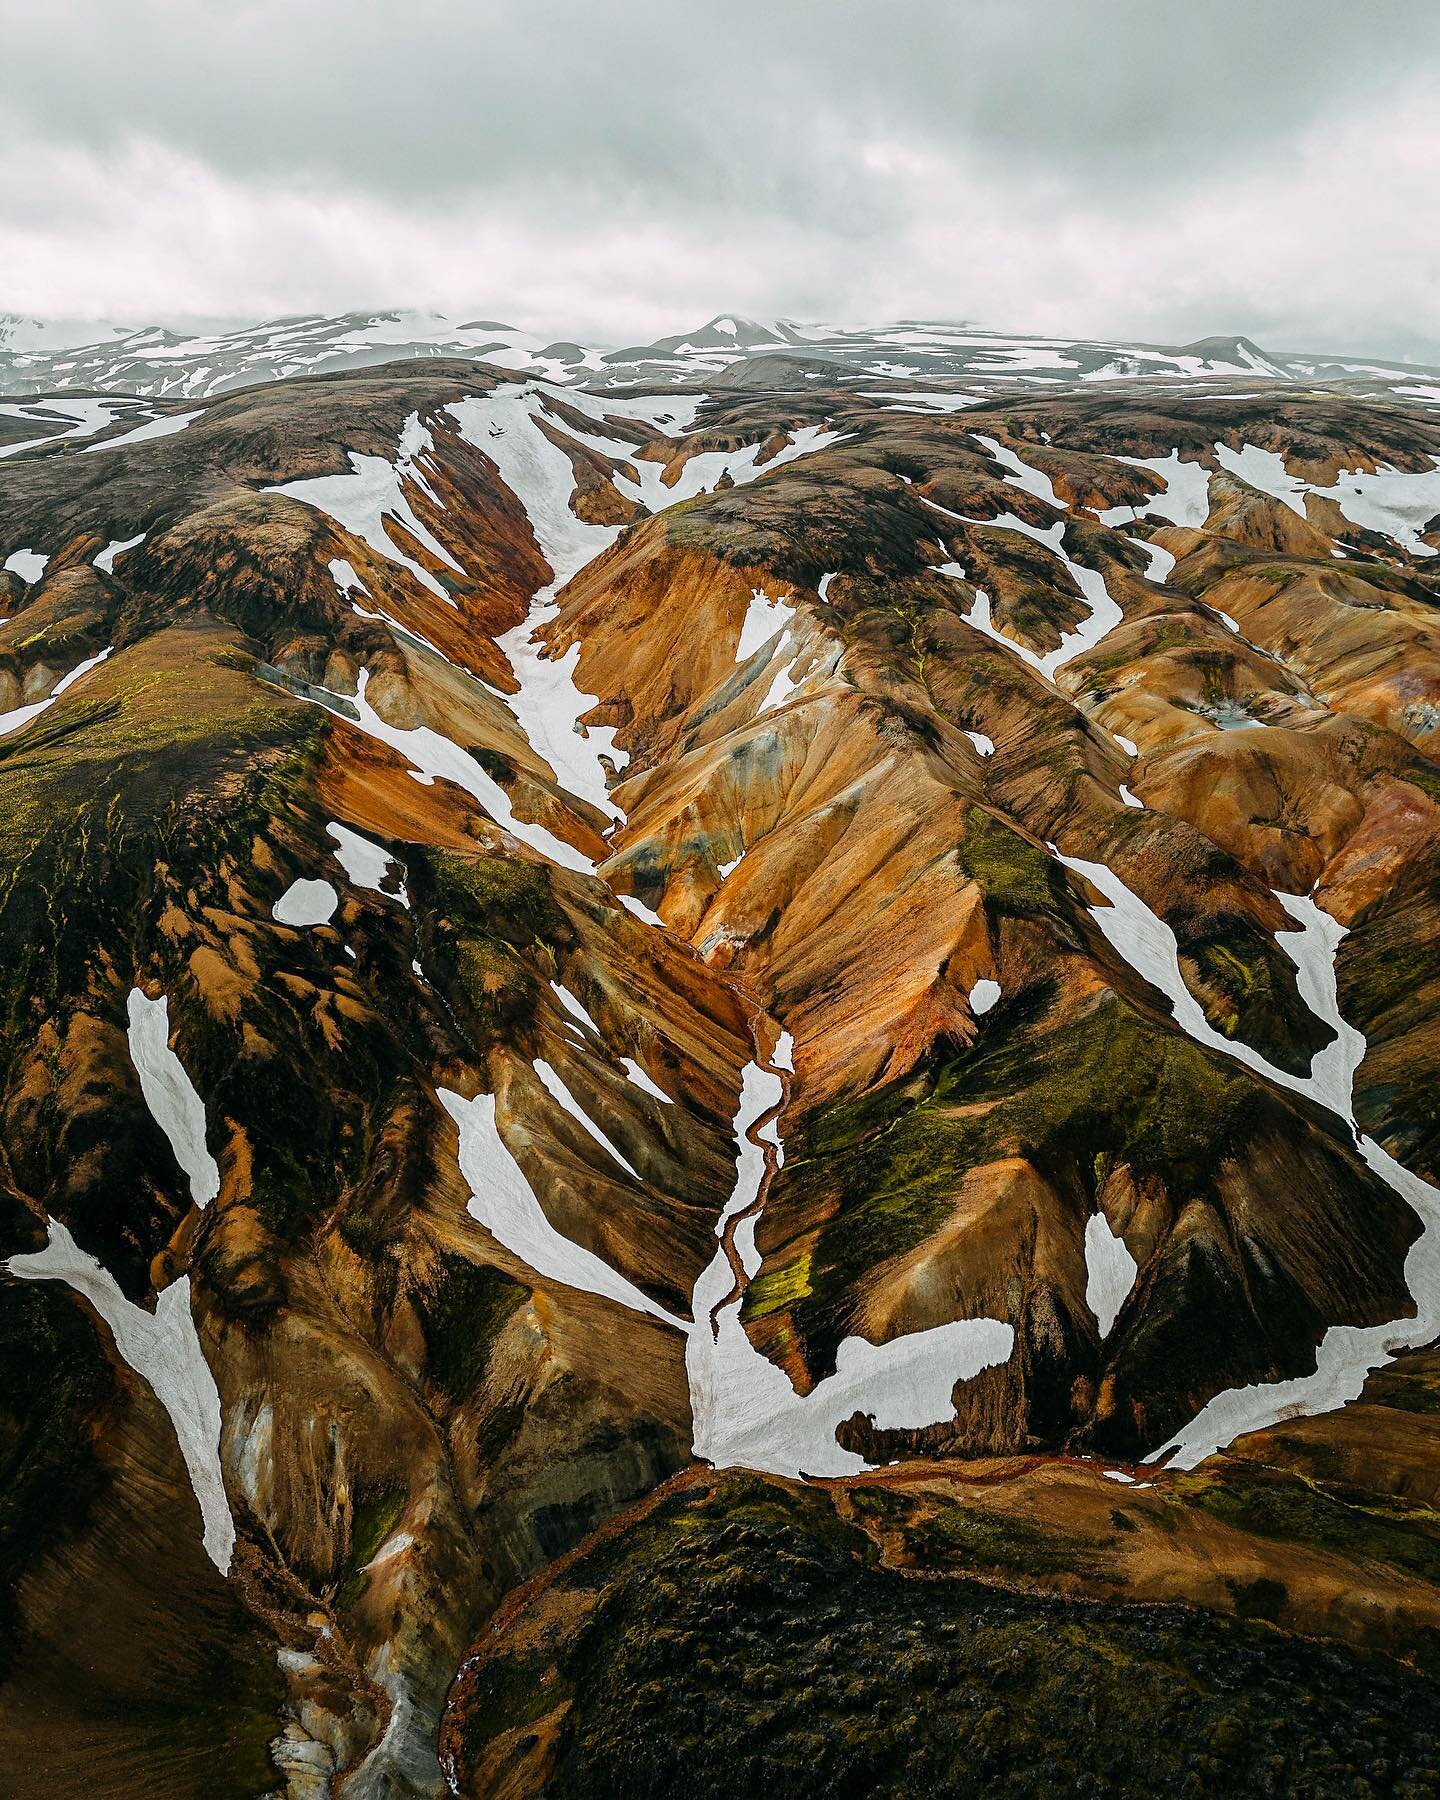 The remote Highlands of Iceland are pure beauty for the eye. But it's hard to get a real view of them without some time spent there and #drone. This incredible view, well known for a lot of landscape photographer, is just 2 hour from the #landmannala